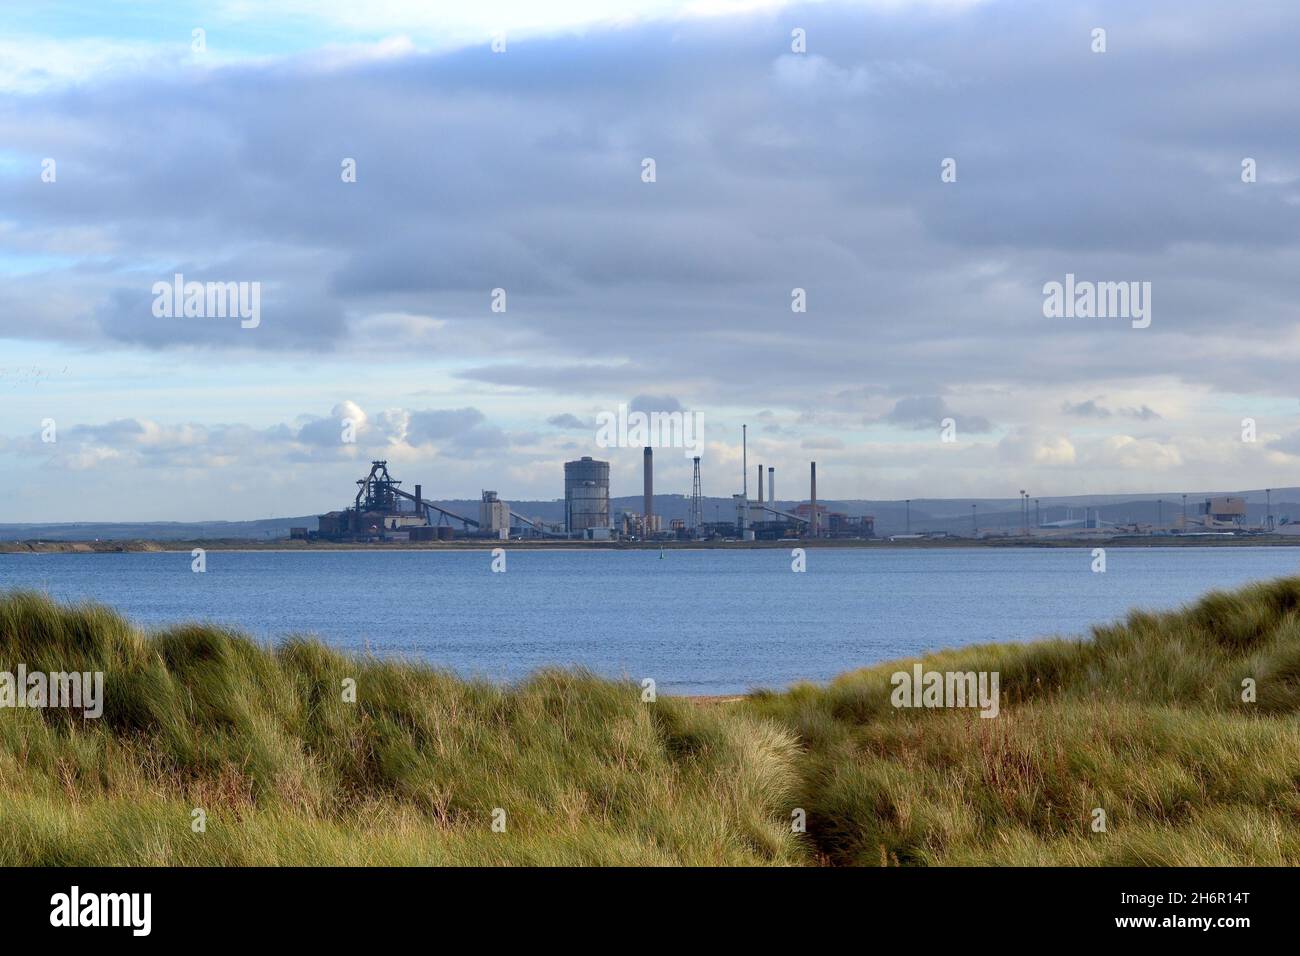 Former Redcar Steelworks site now owned by TVCA as part of Teesside Freeport and the future Net Zero Teesside Power and Carbon Capture site. Stock Photo